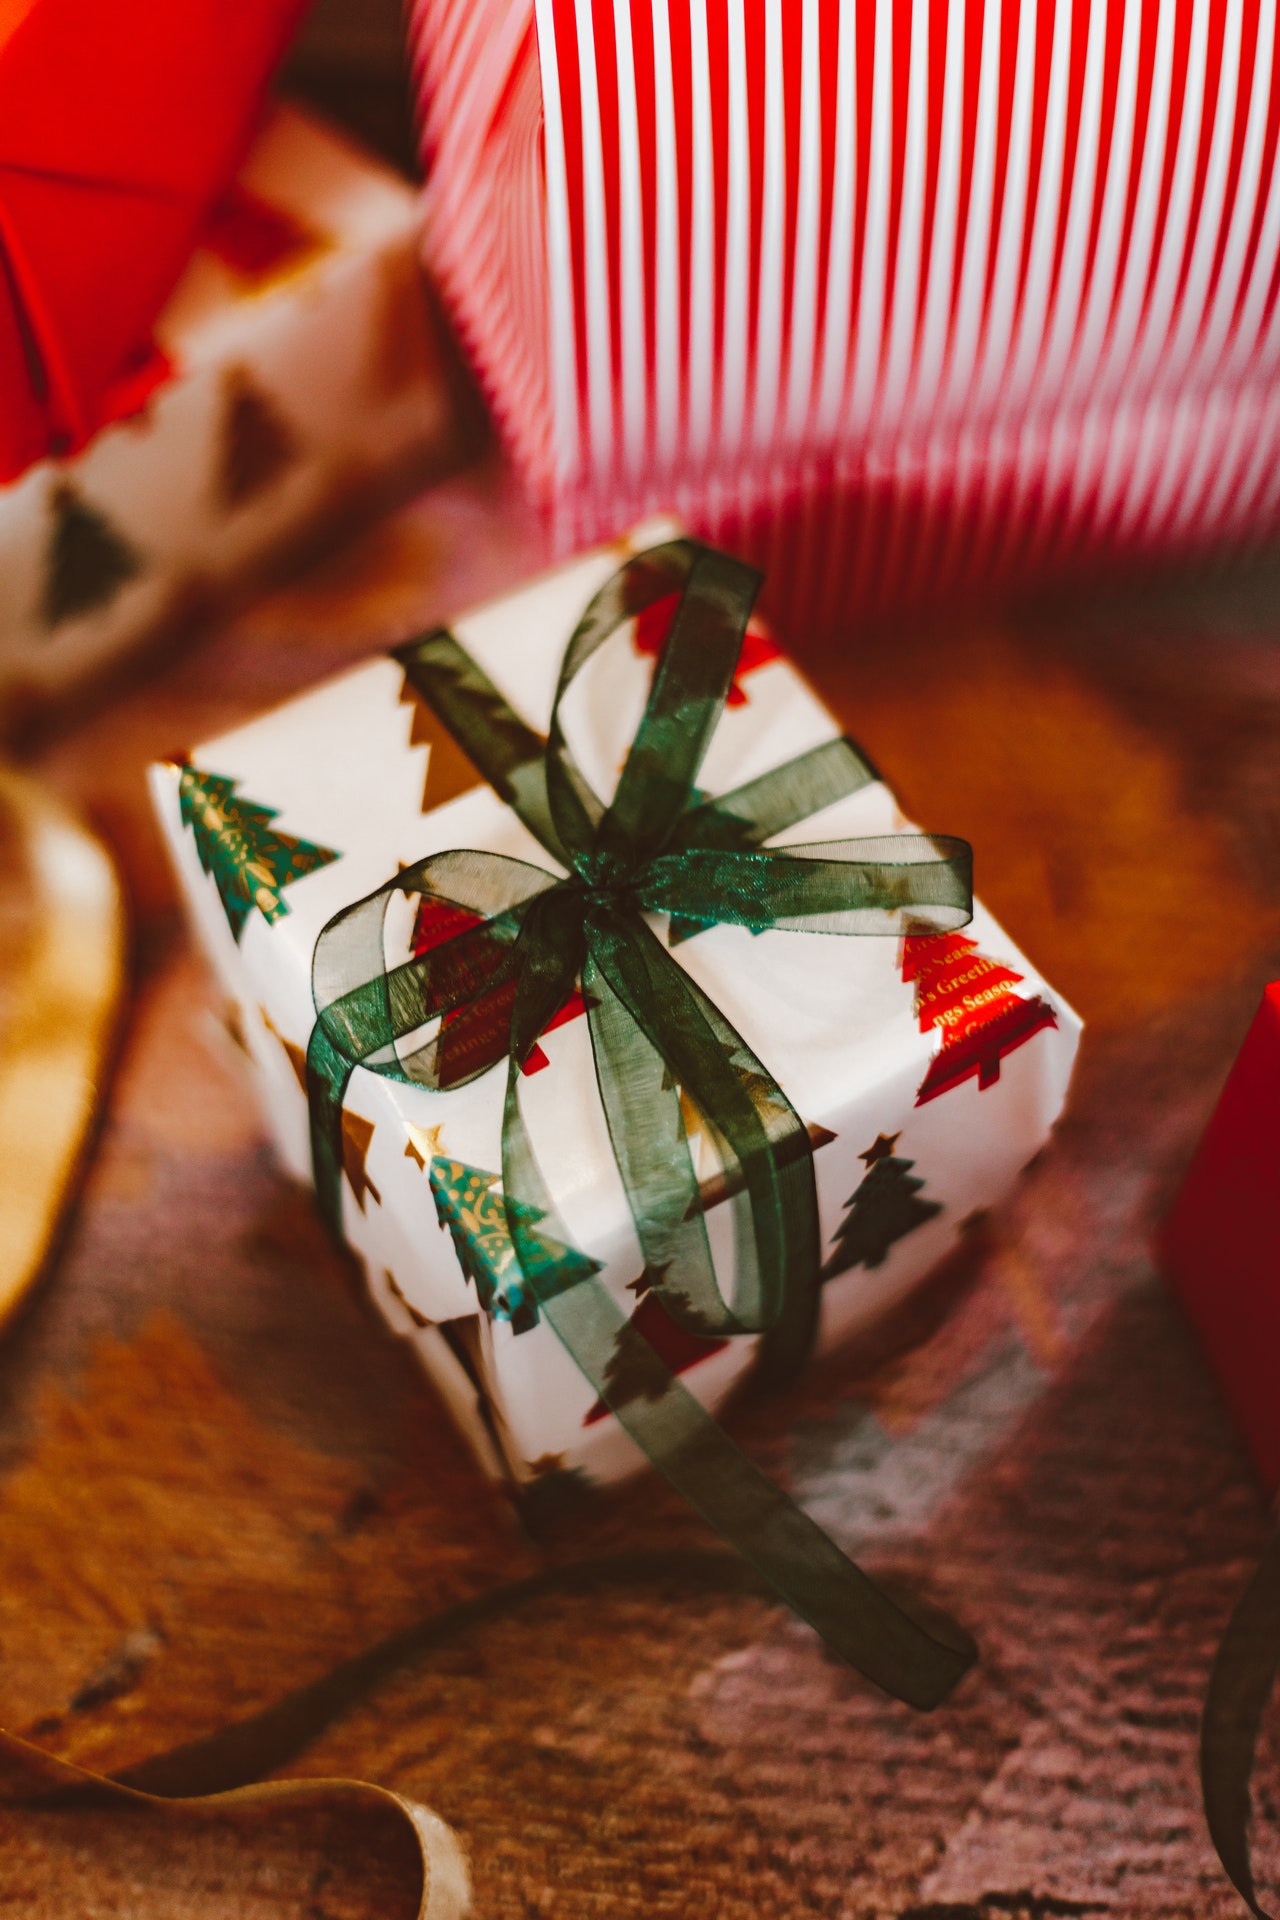 Top tips on where to hide the presents